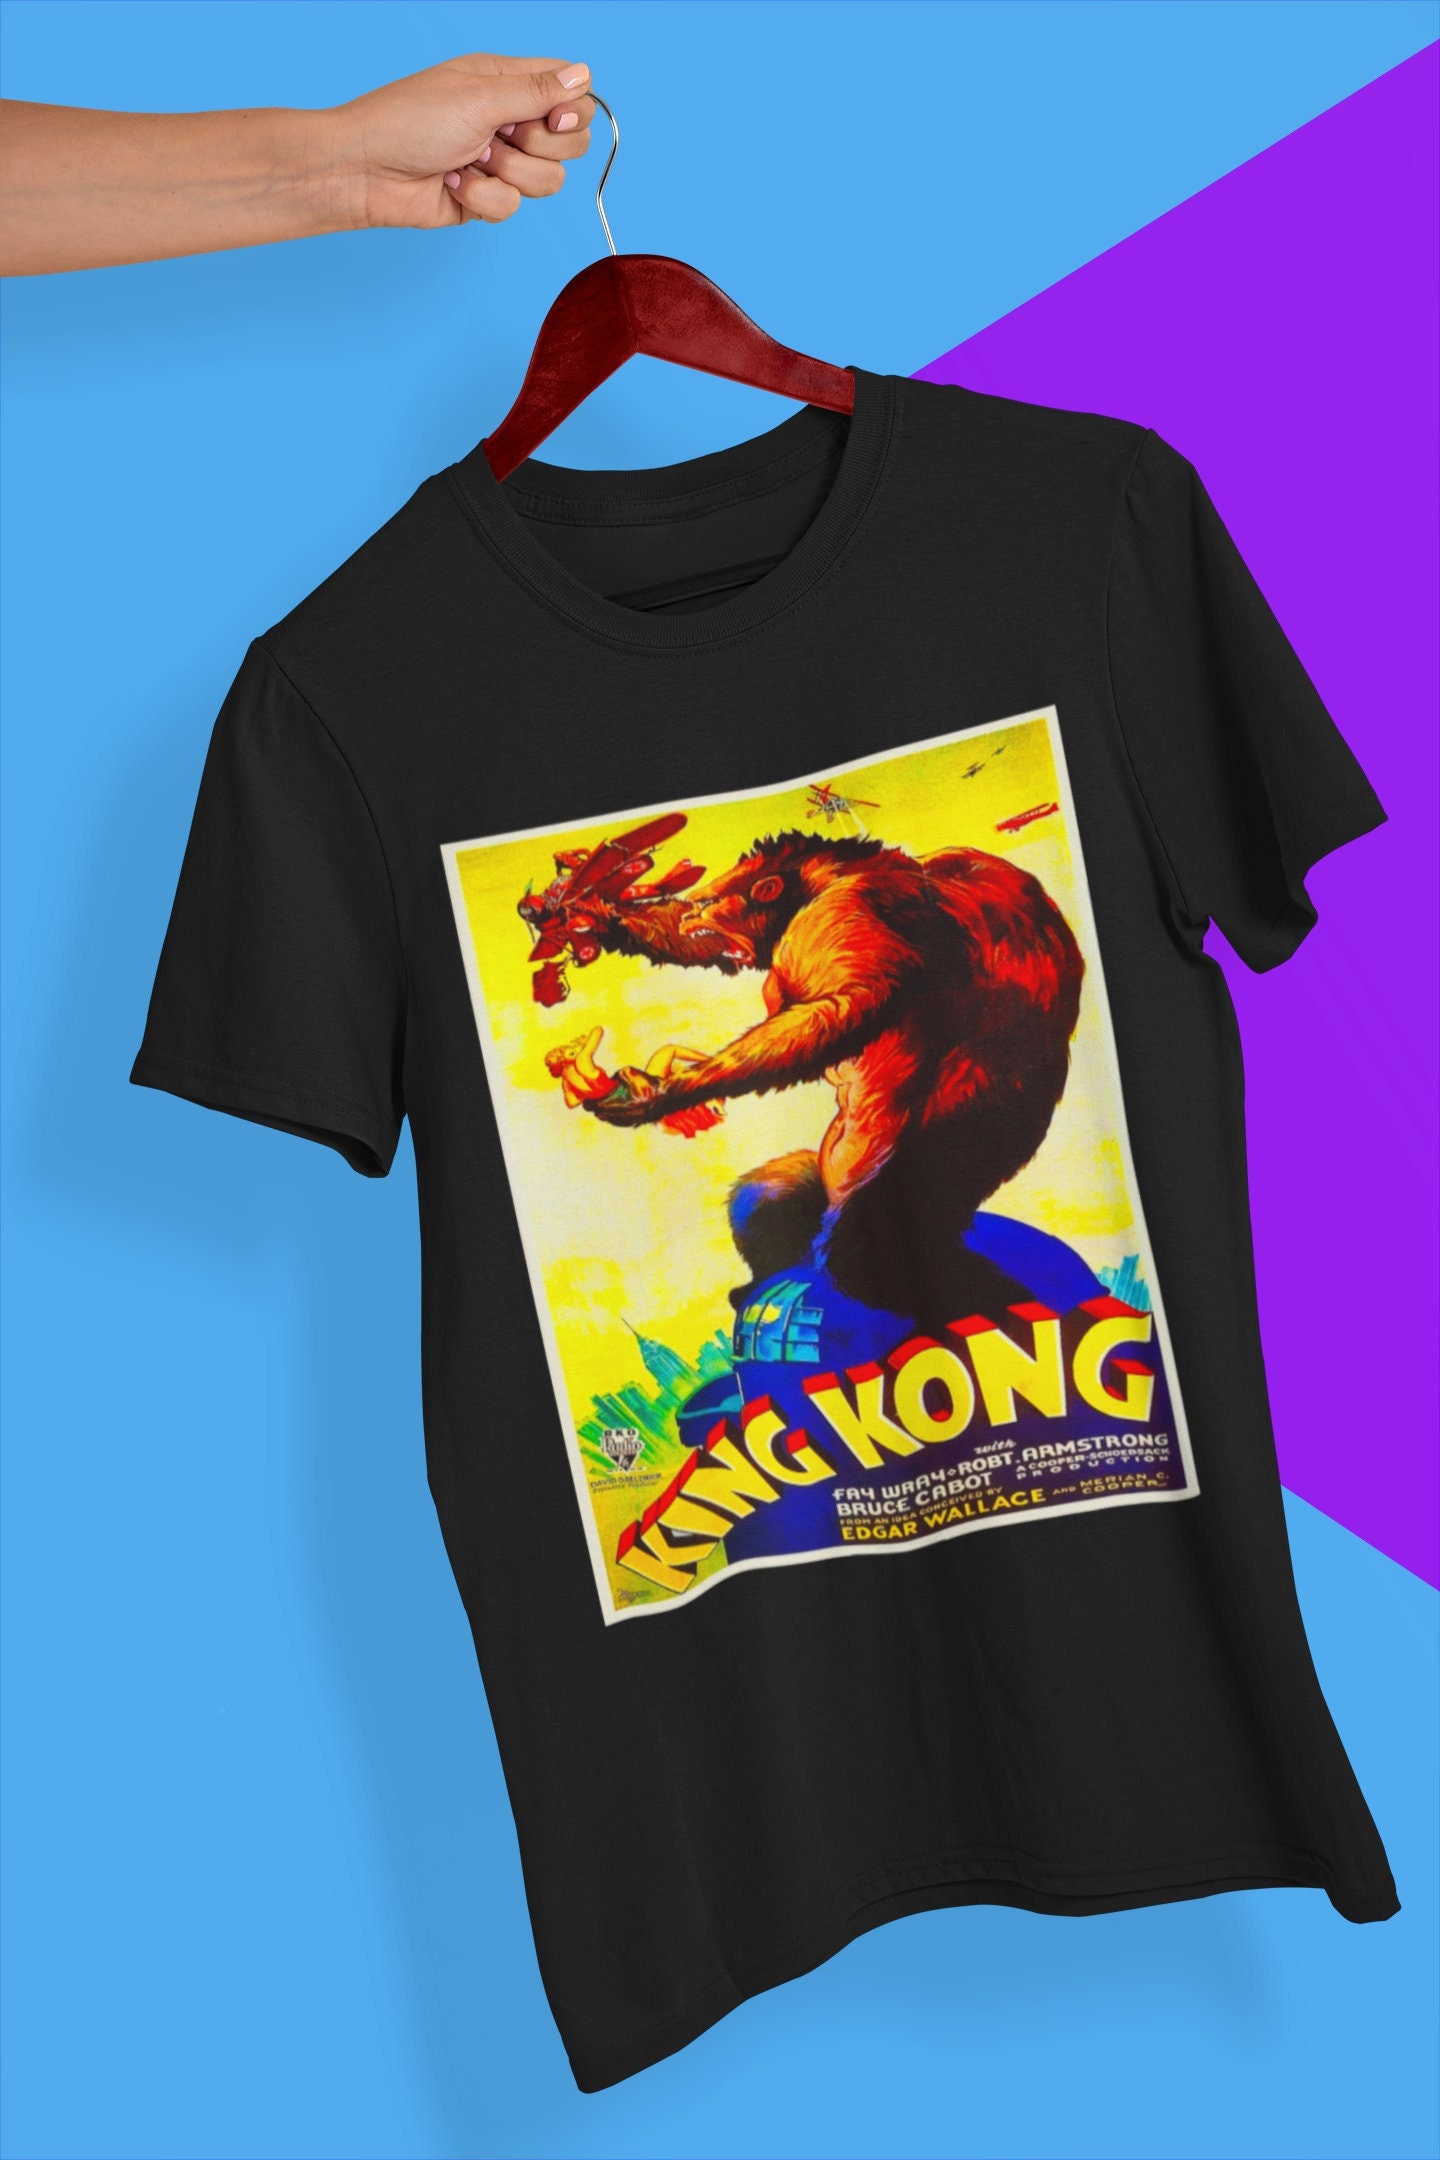 Discover King Kong Soft T-Shirt, Classic Monster Movie Poster T Shirt